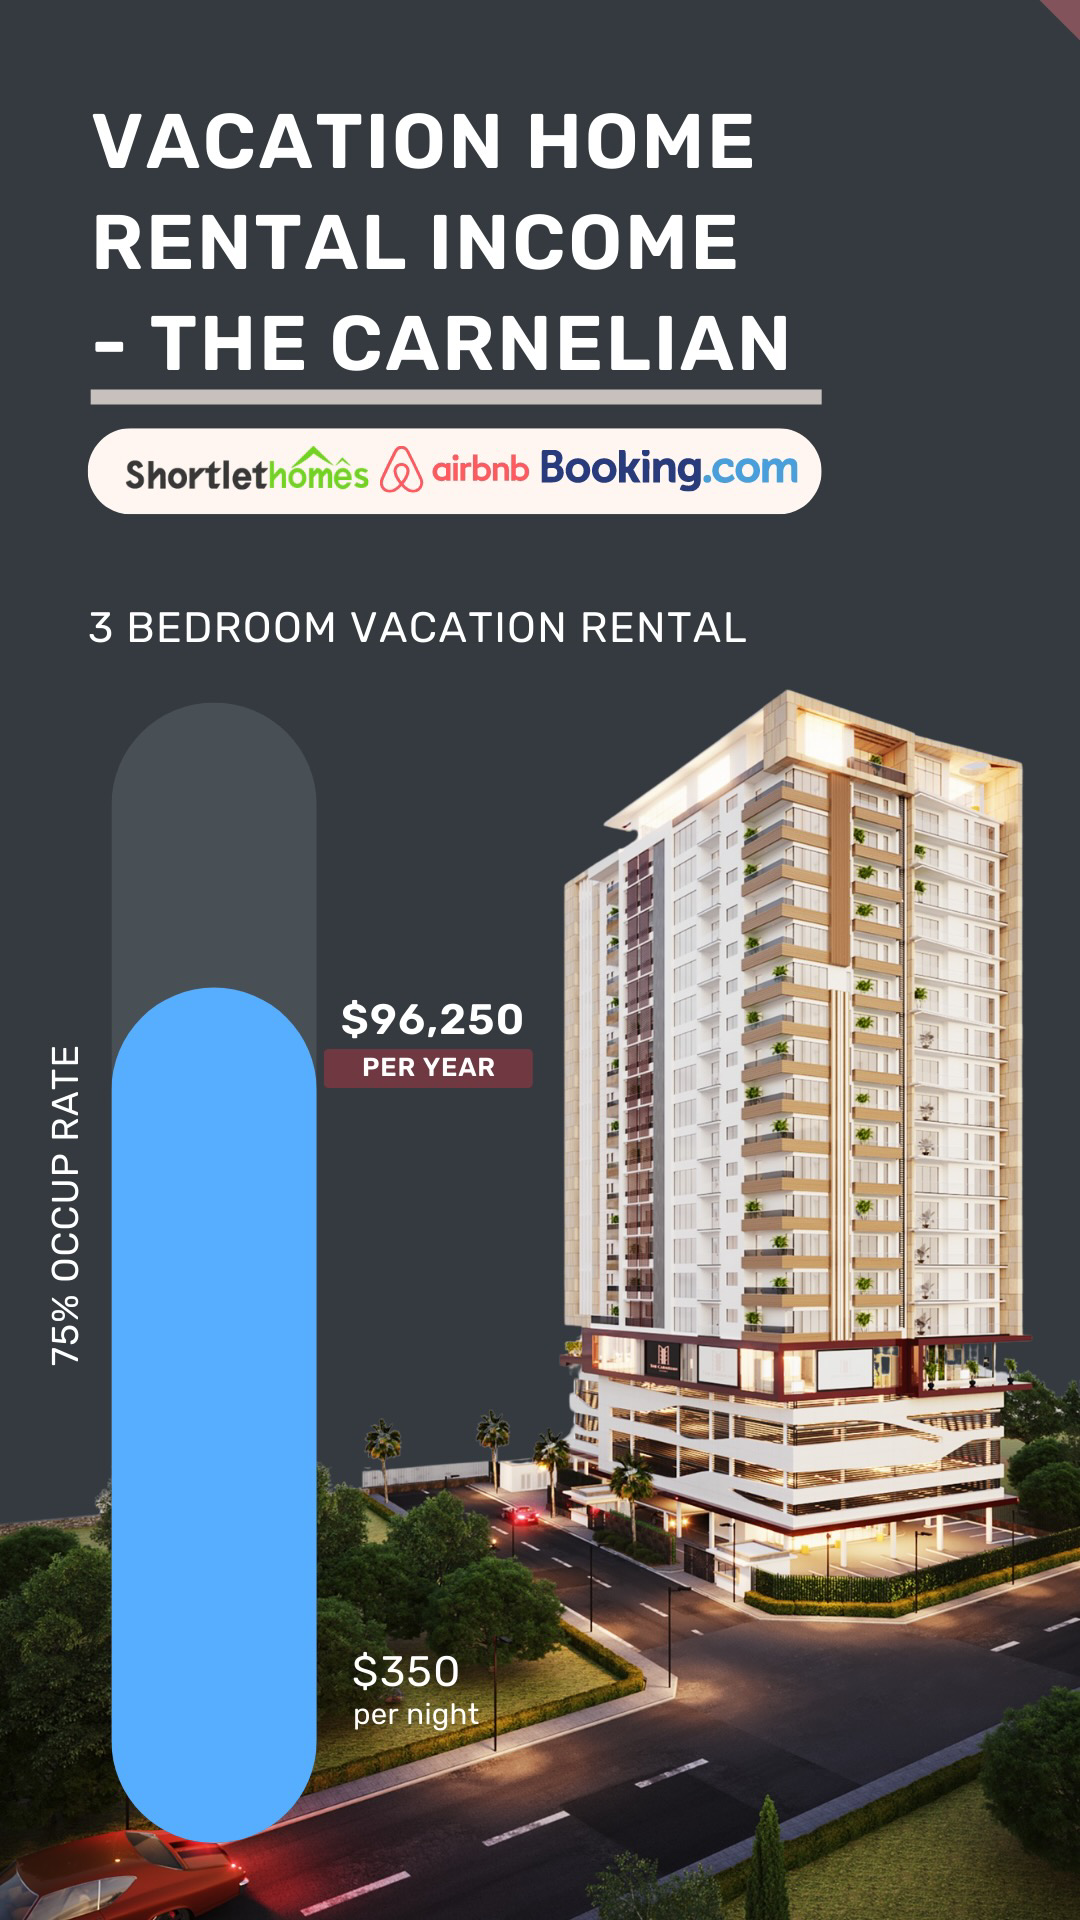 Rental income projection on a 3-bedroom apartment at the Carnelian